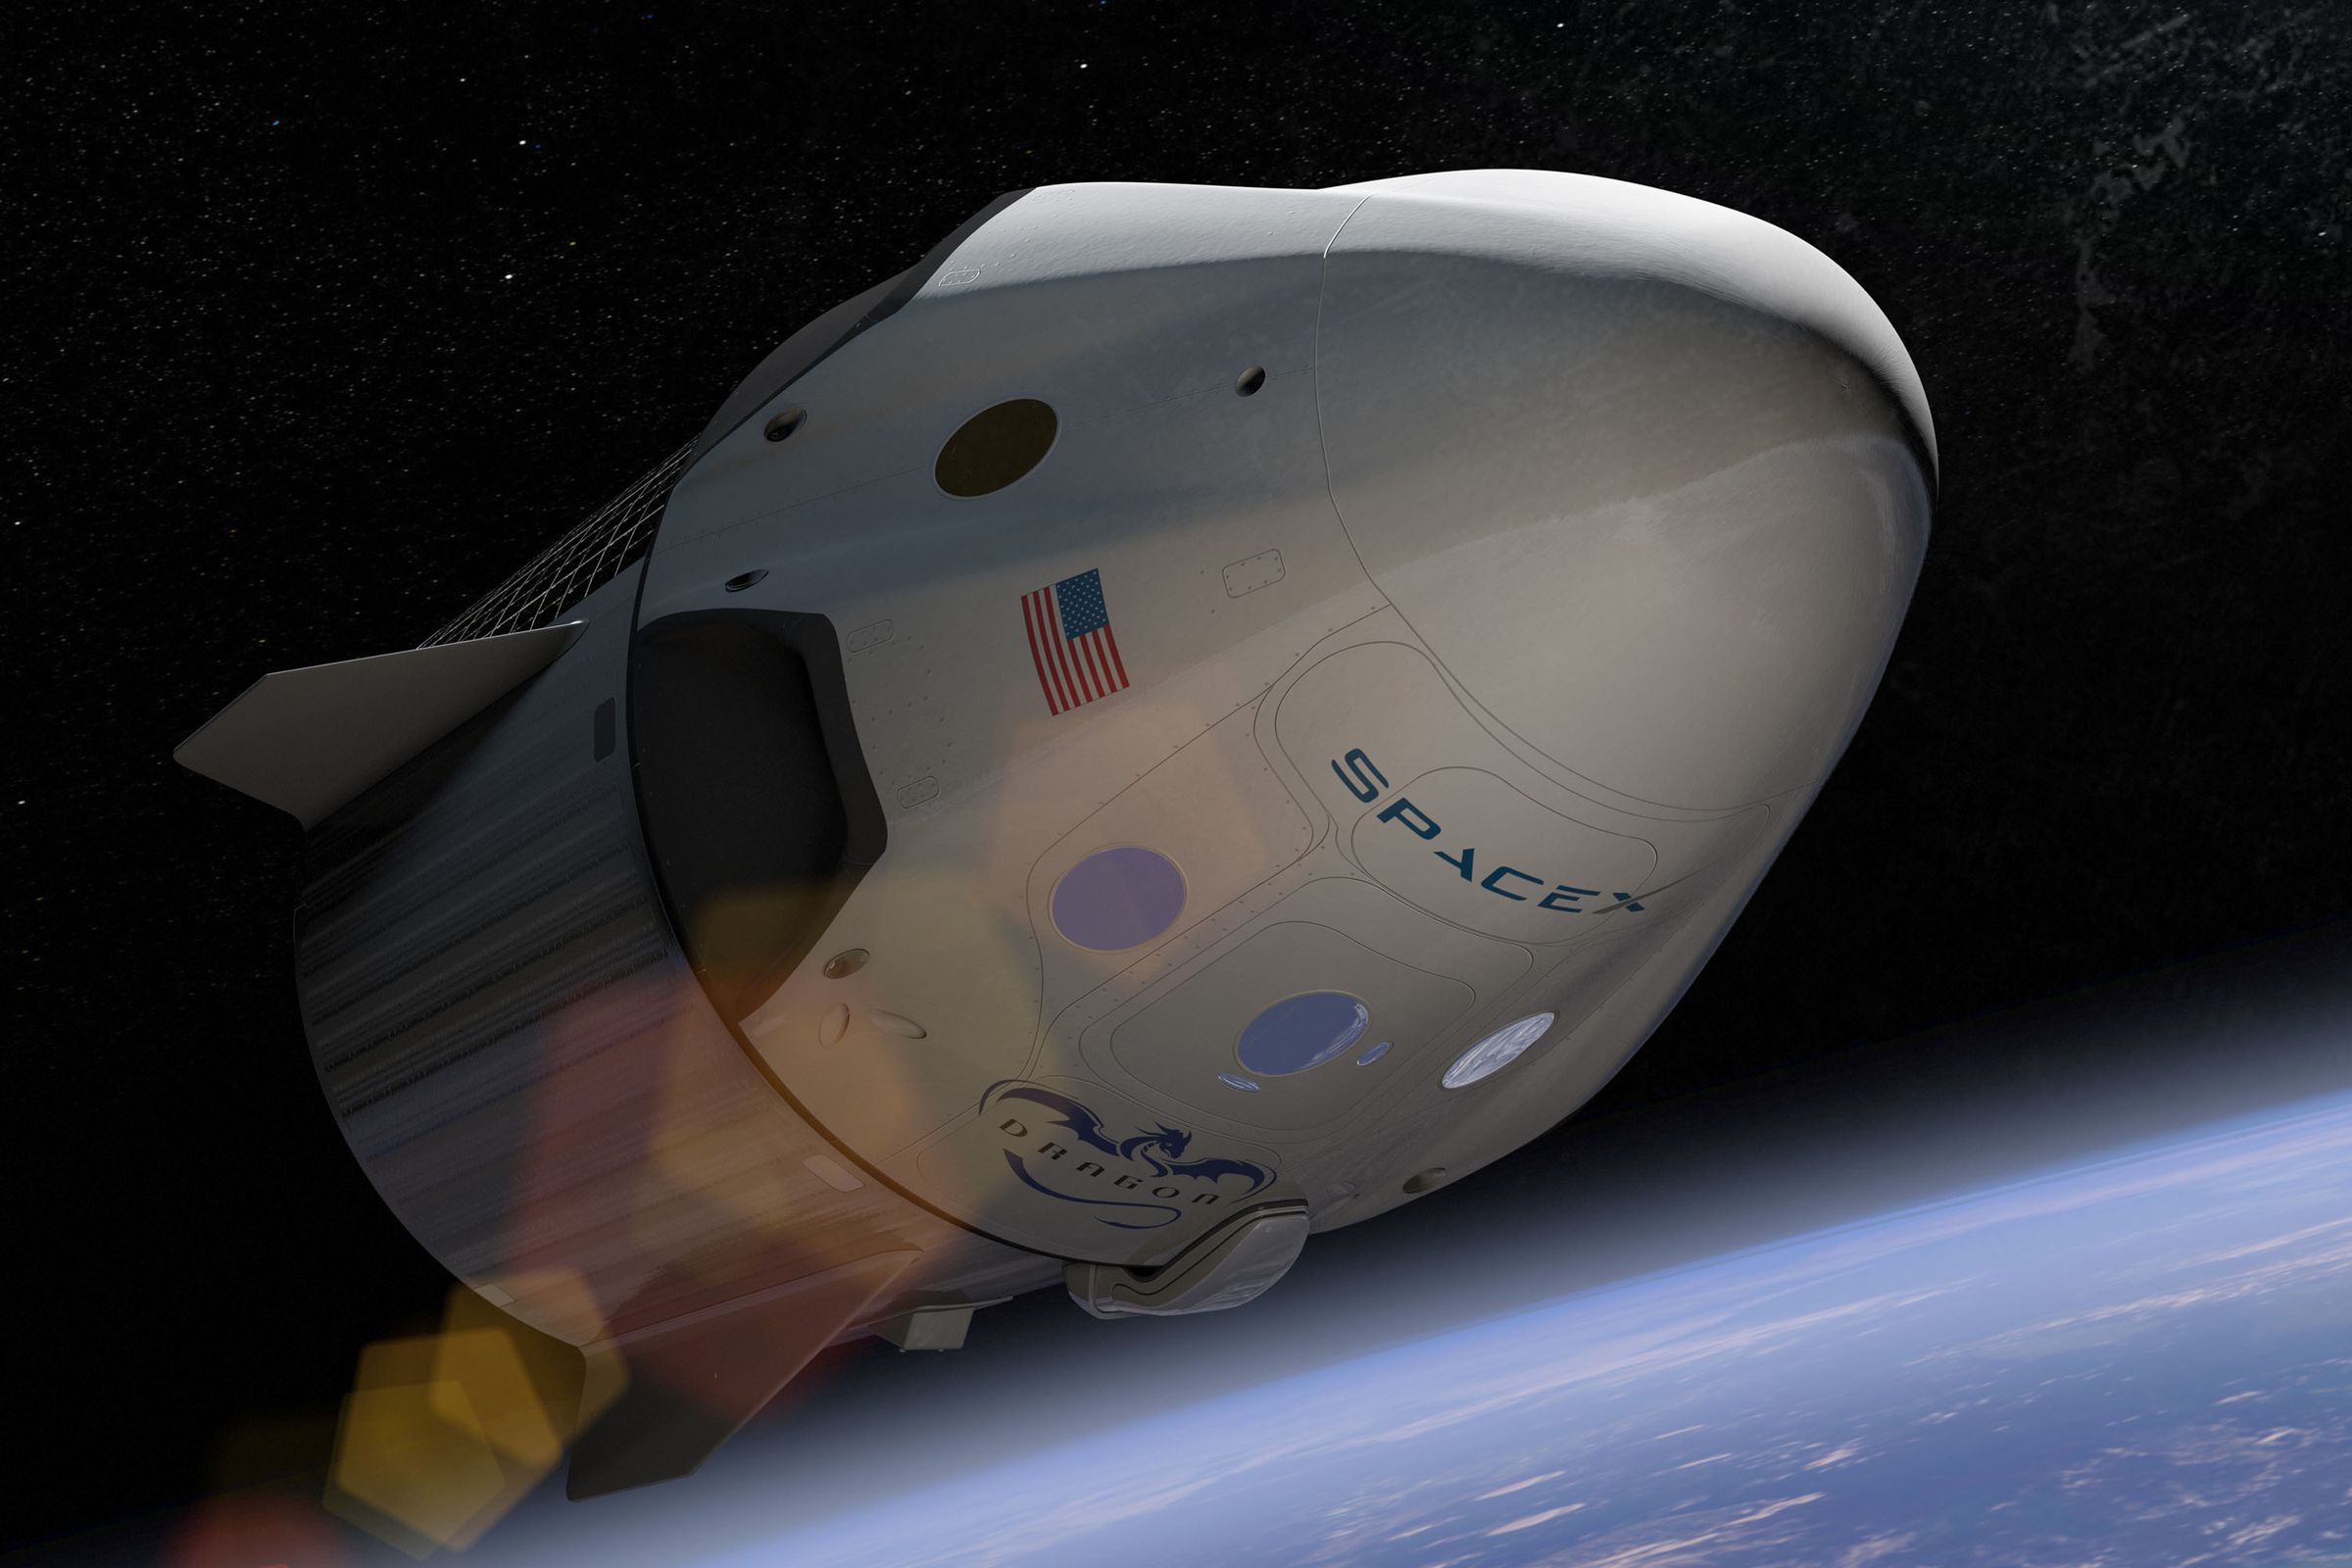 SpaceX’s Crew Dragon.